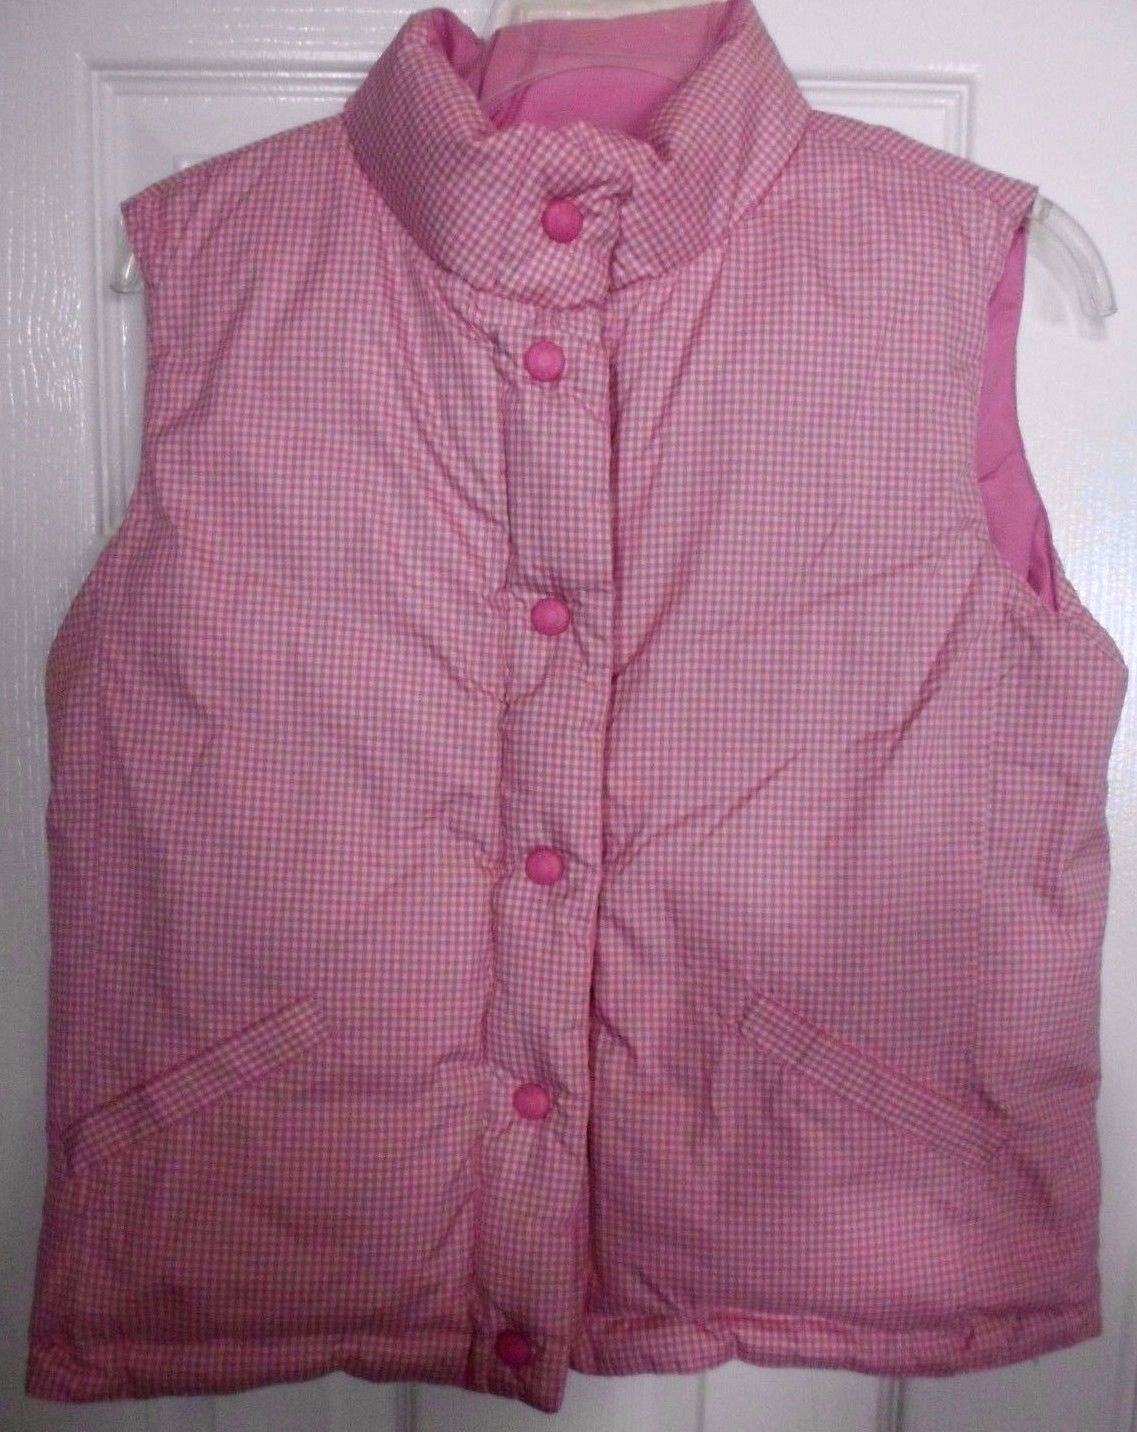 Gap Kids PINK reversible down vest 14 XXL large girls puffer feather plaid check - $17.59